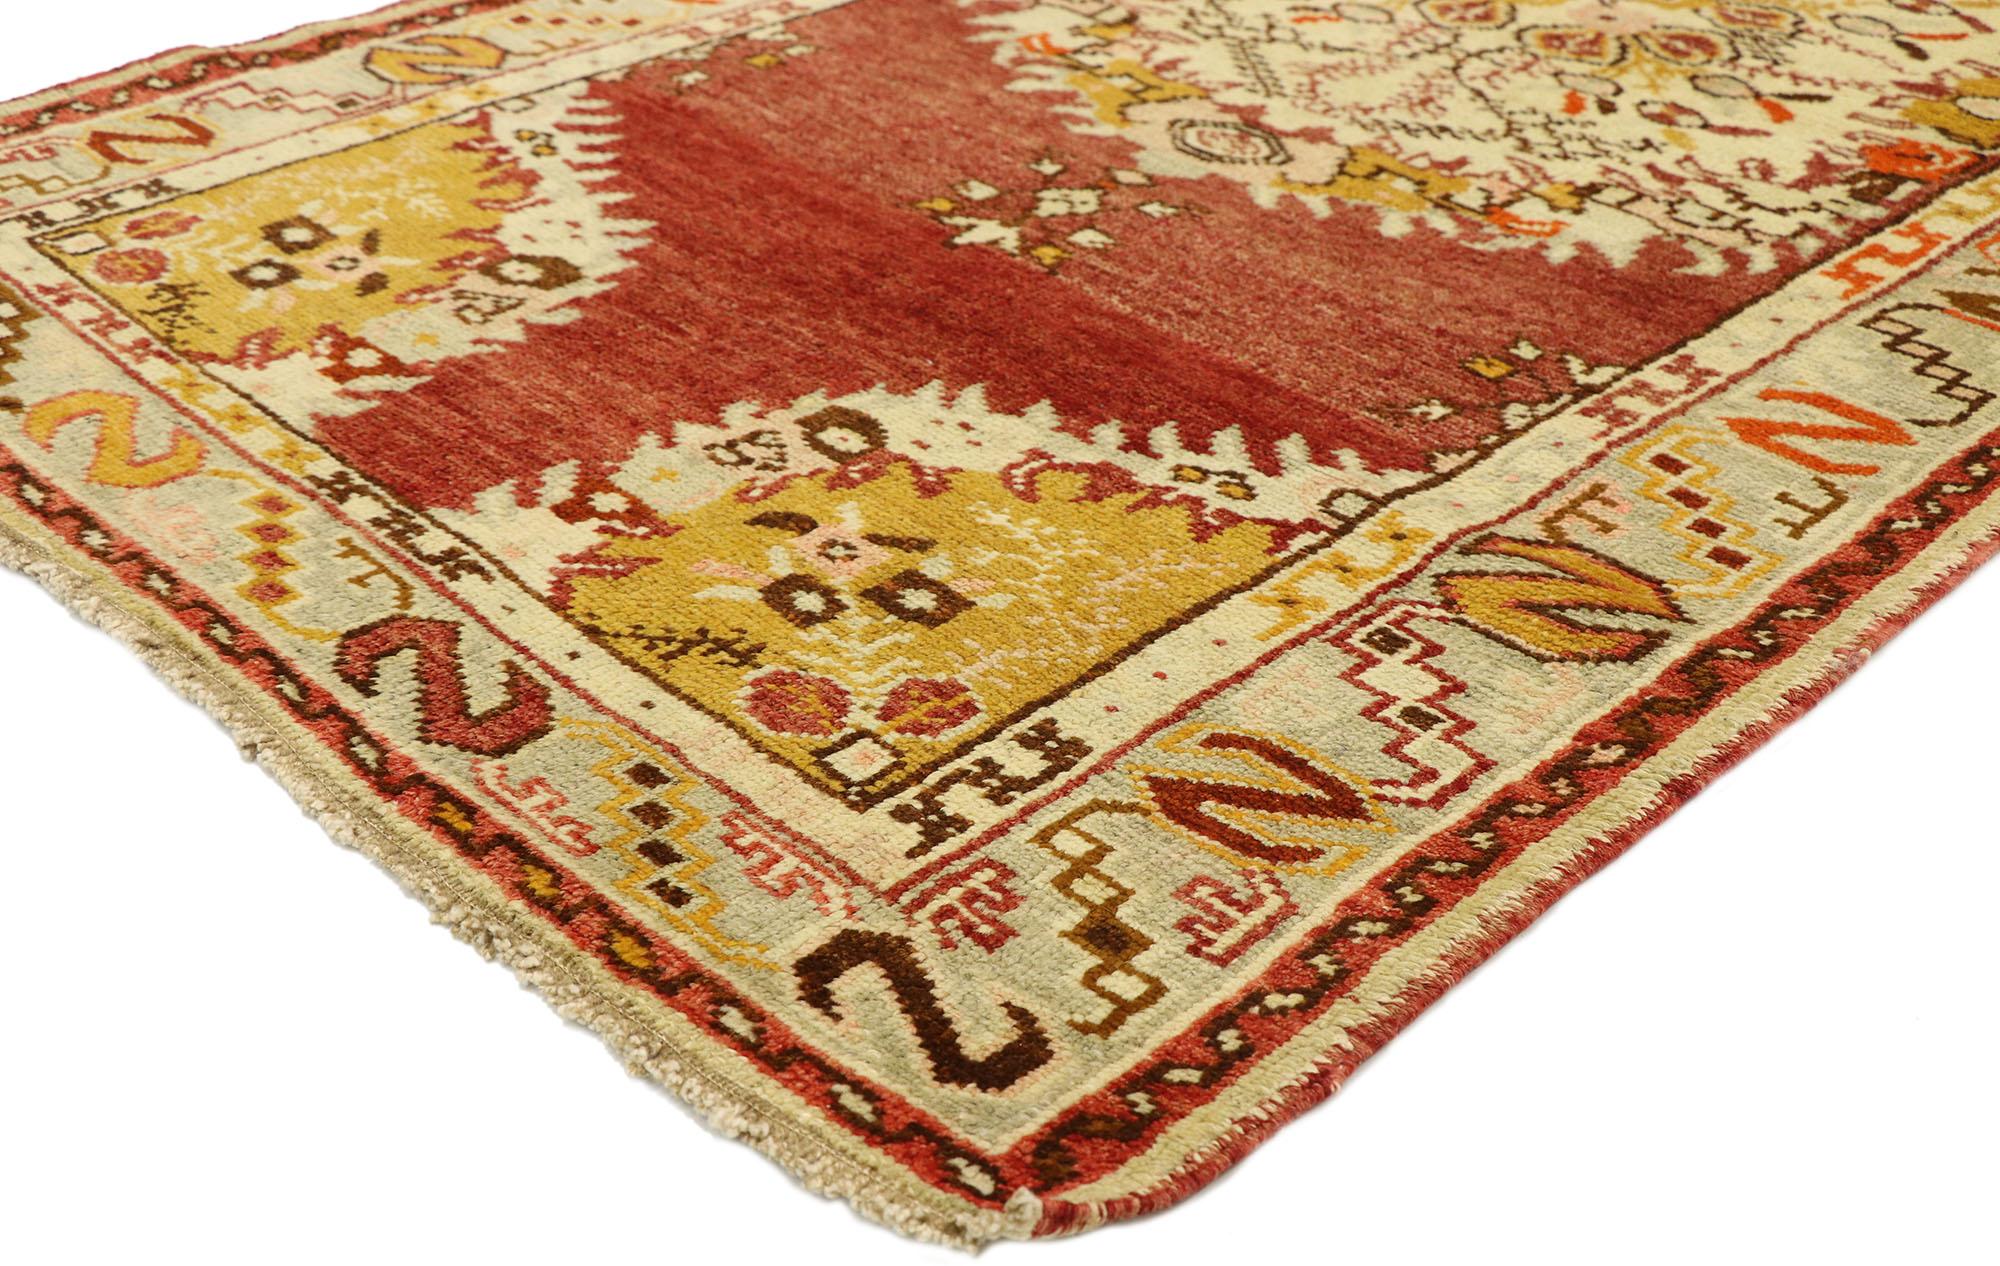 50129, vintage Turkish Oushak Accent rug with Rustic French Rococo style, entry or Foyer rug. Balancing a timeless design and rustic sensibility with French Rococo style, this hand knotted wool vintage Turkish Oushak rug is poised to impress. The